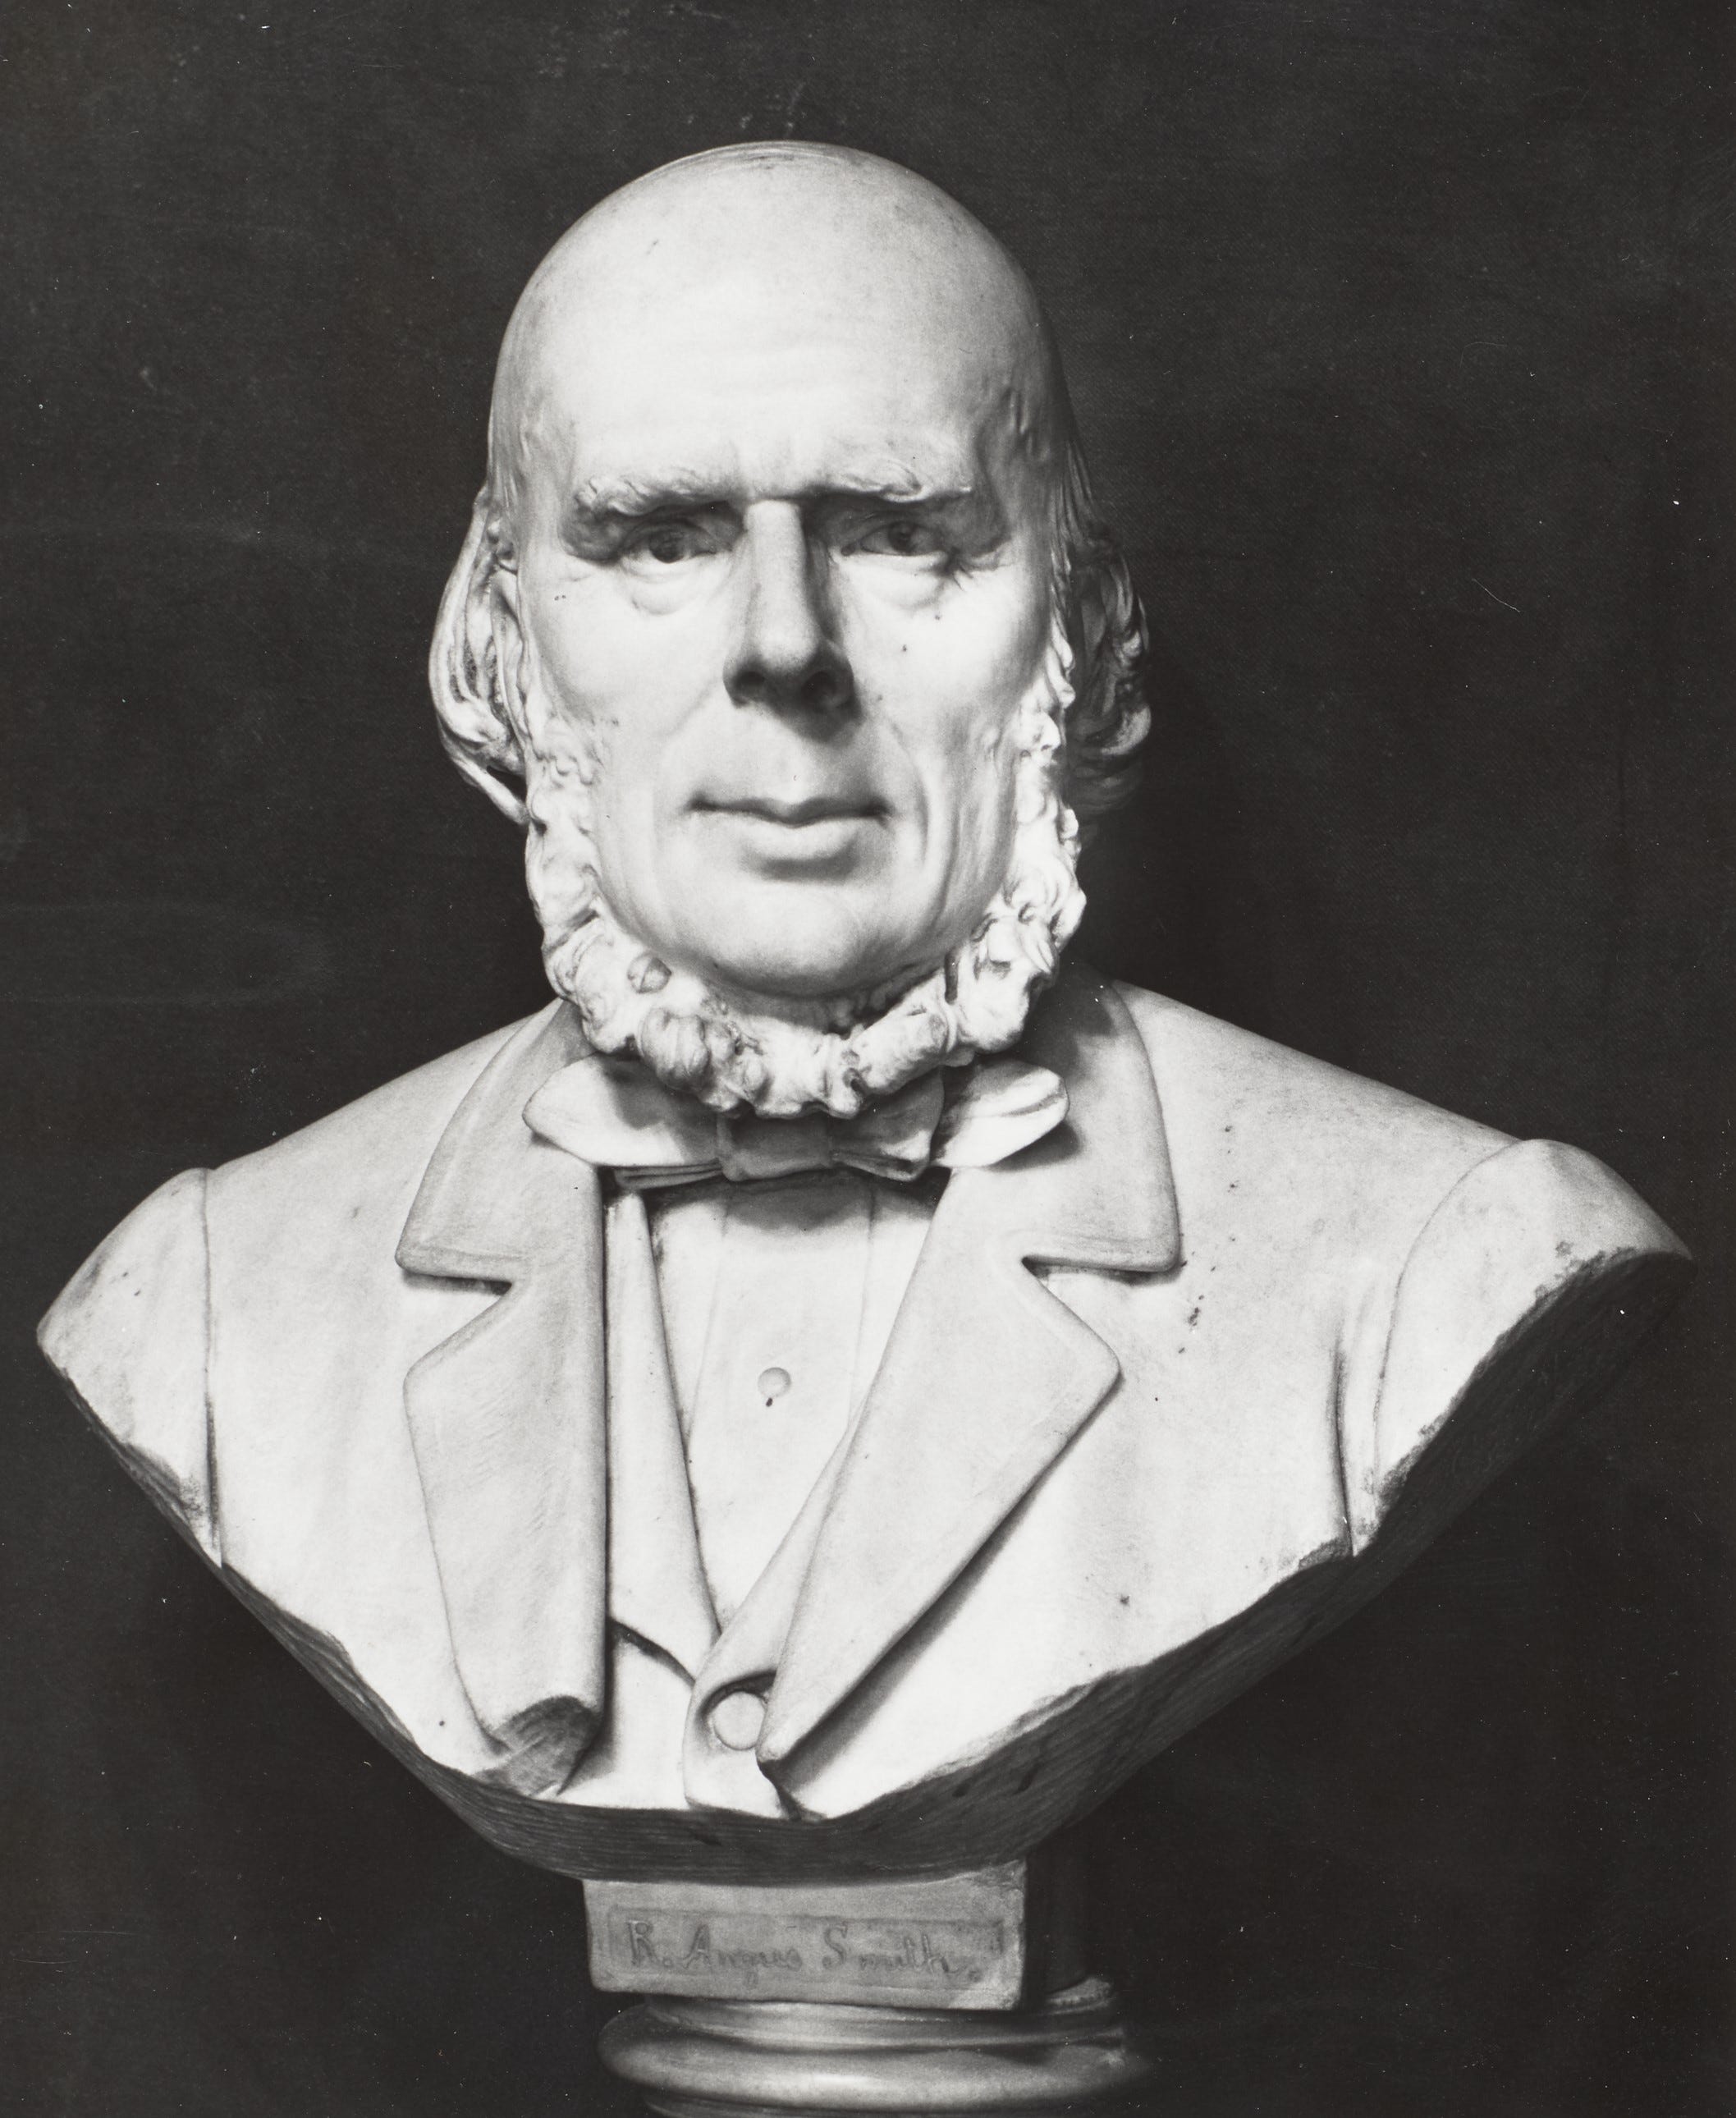 Marble bust of Robert Angus Smith, University of Manchester